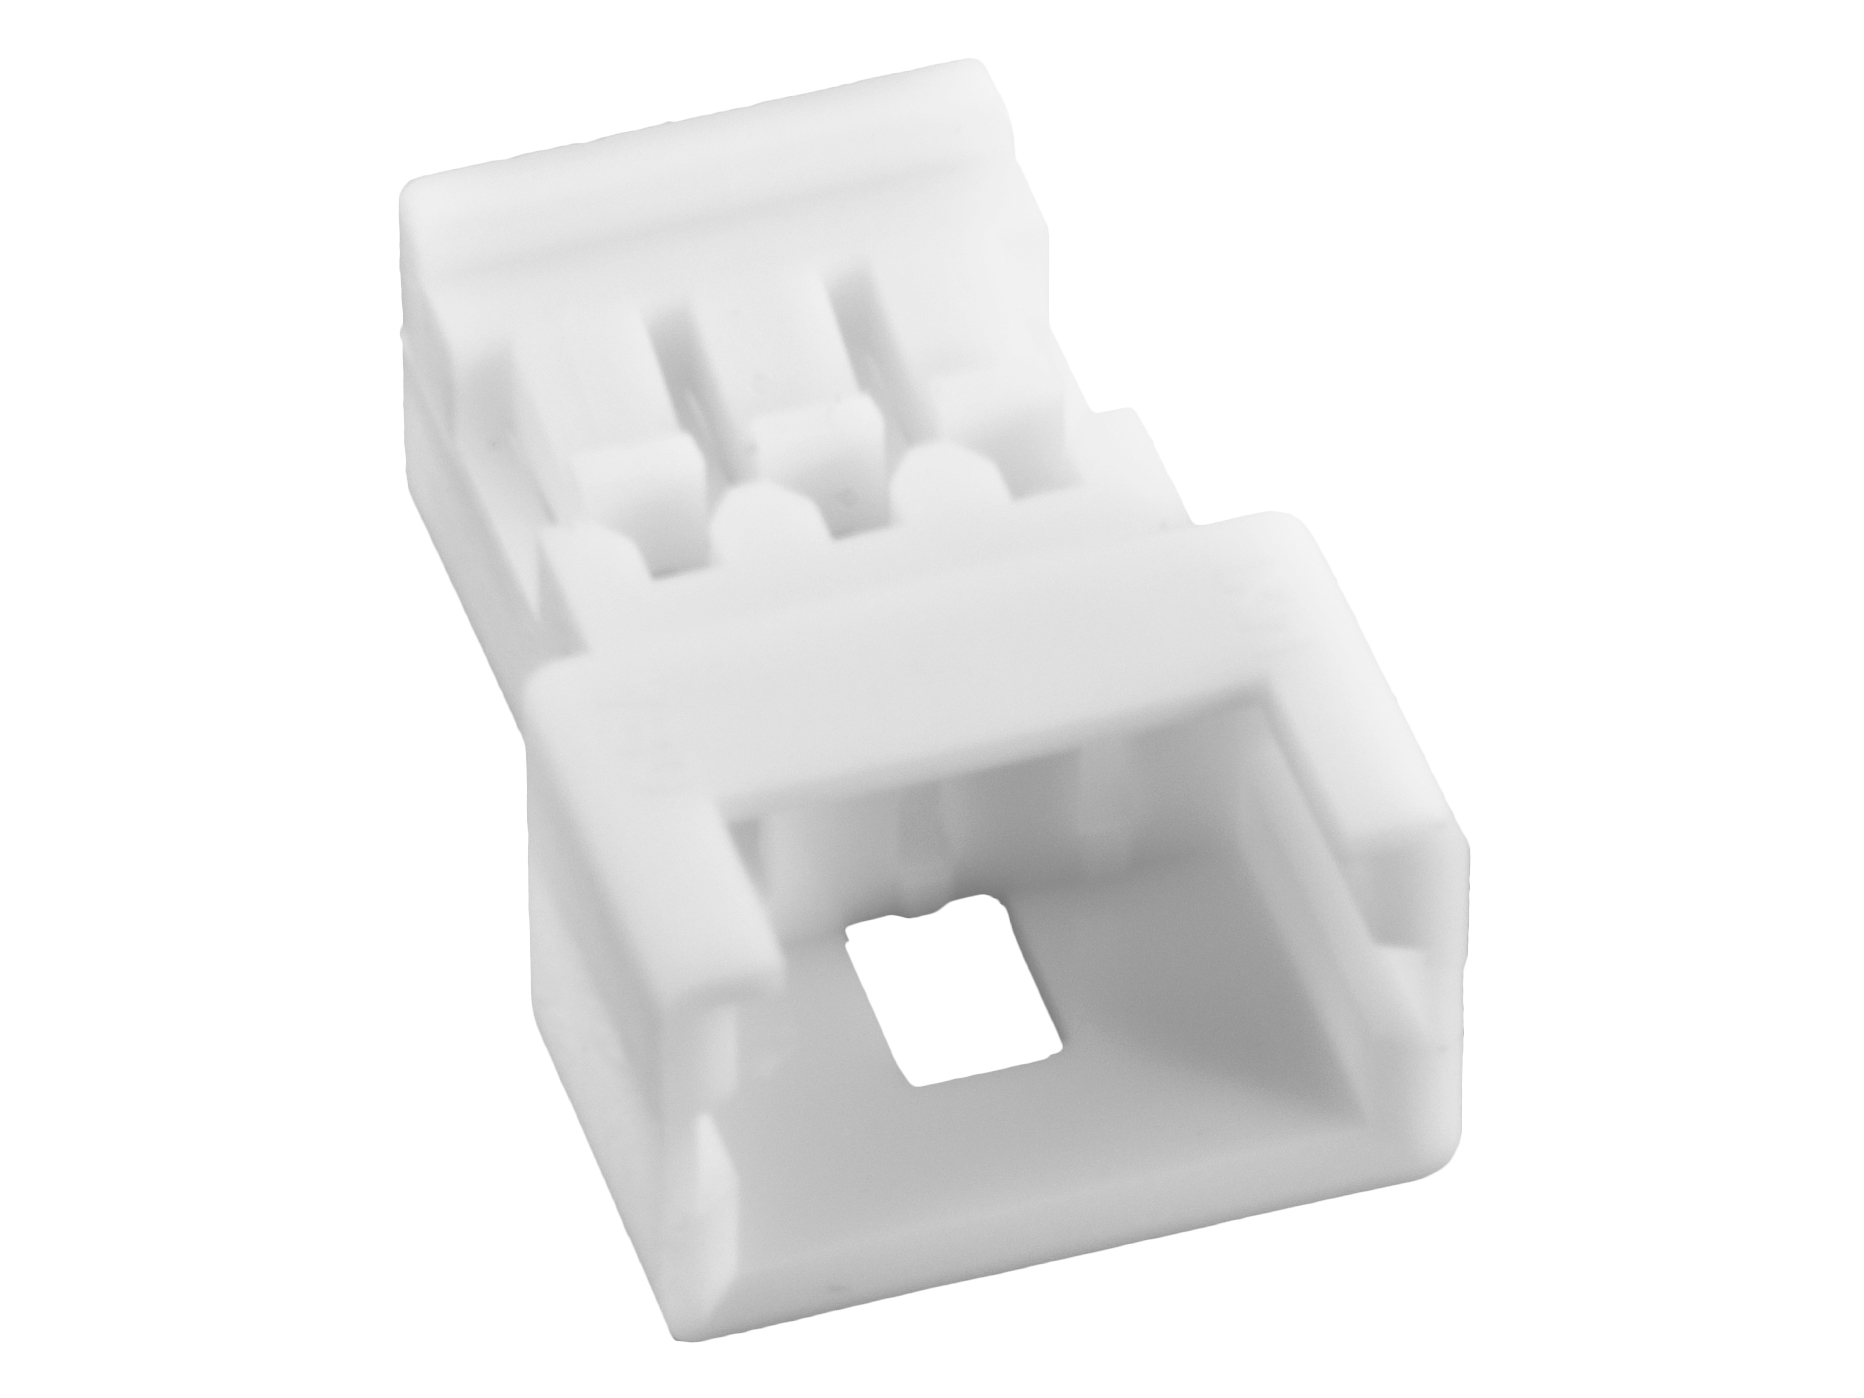 Contact housing PicoBlade 3p male 1.25mm @ electrokit